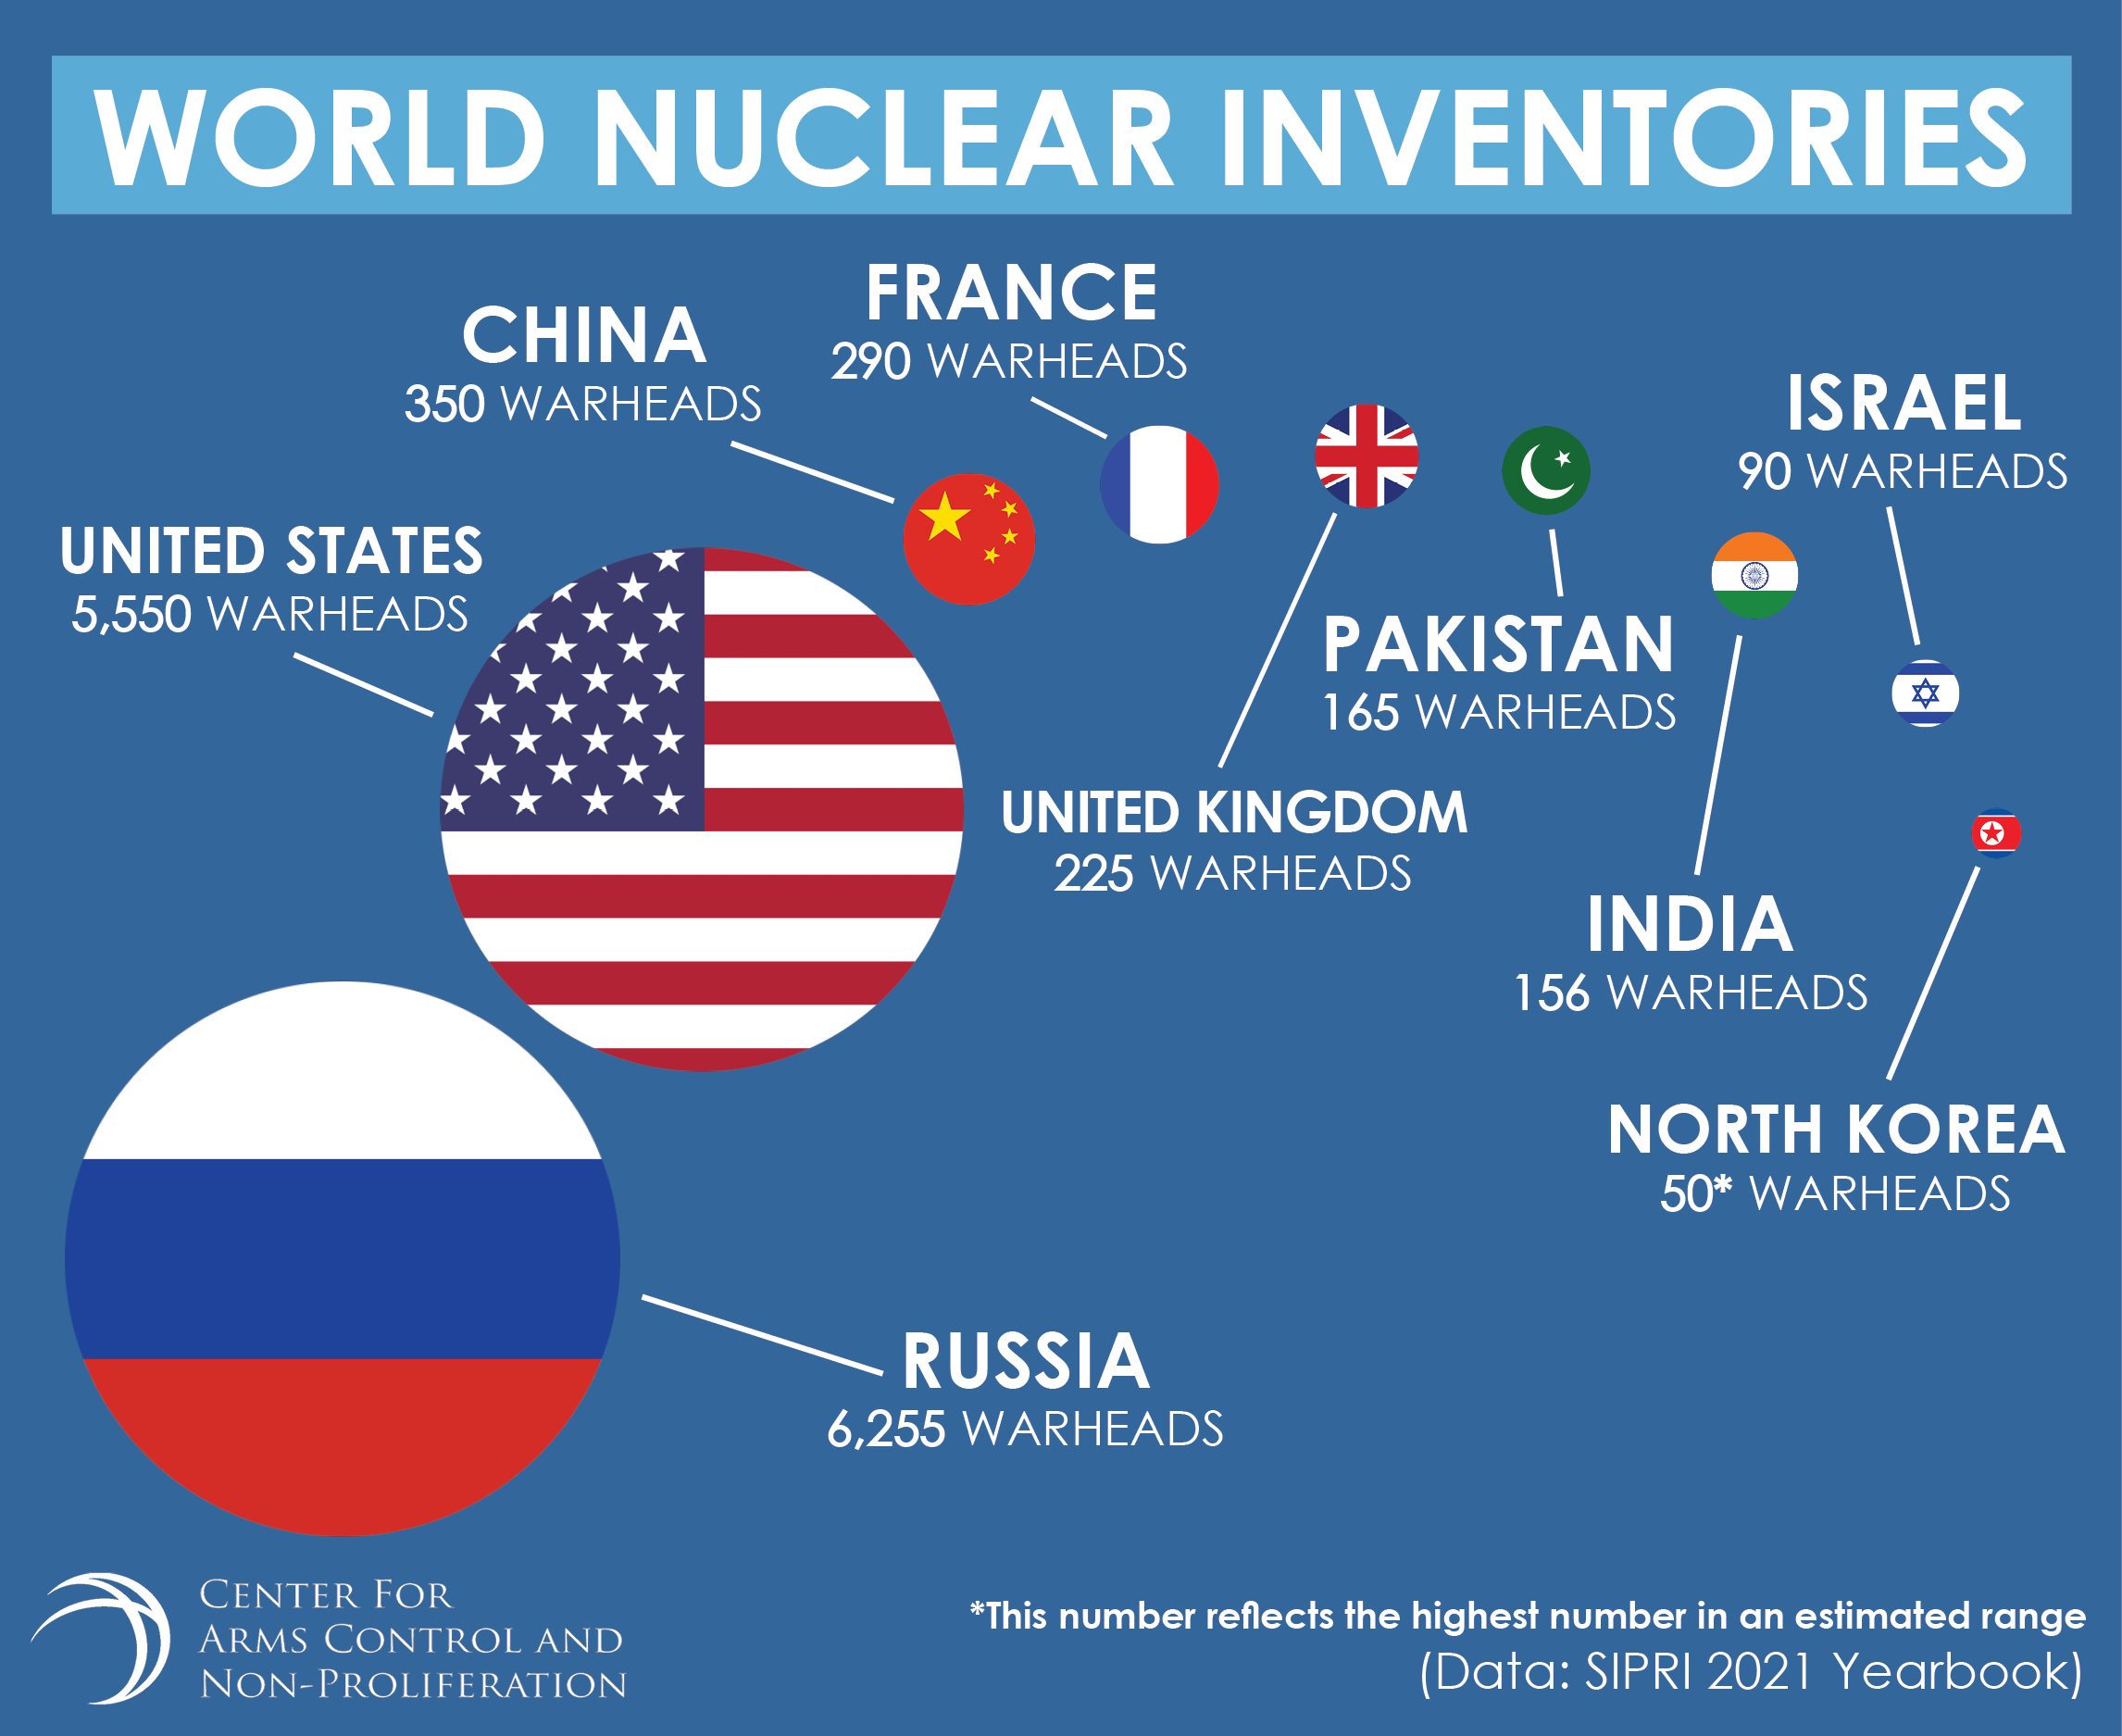 World Nuclear Inventories Center for Arms Control and NonProliferation